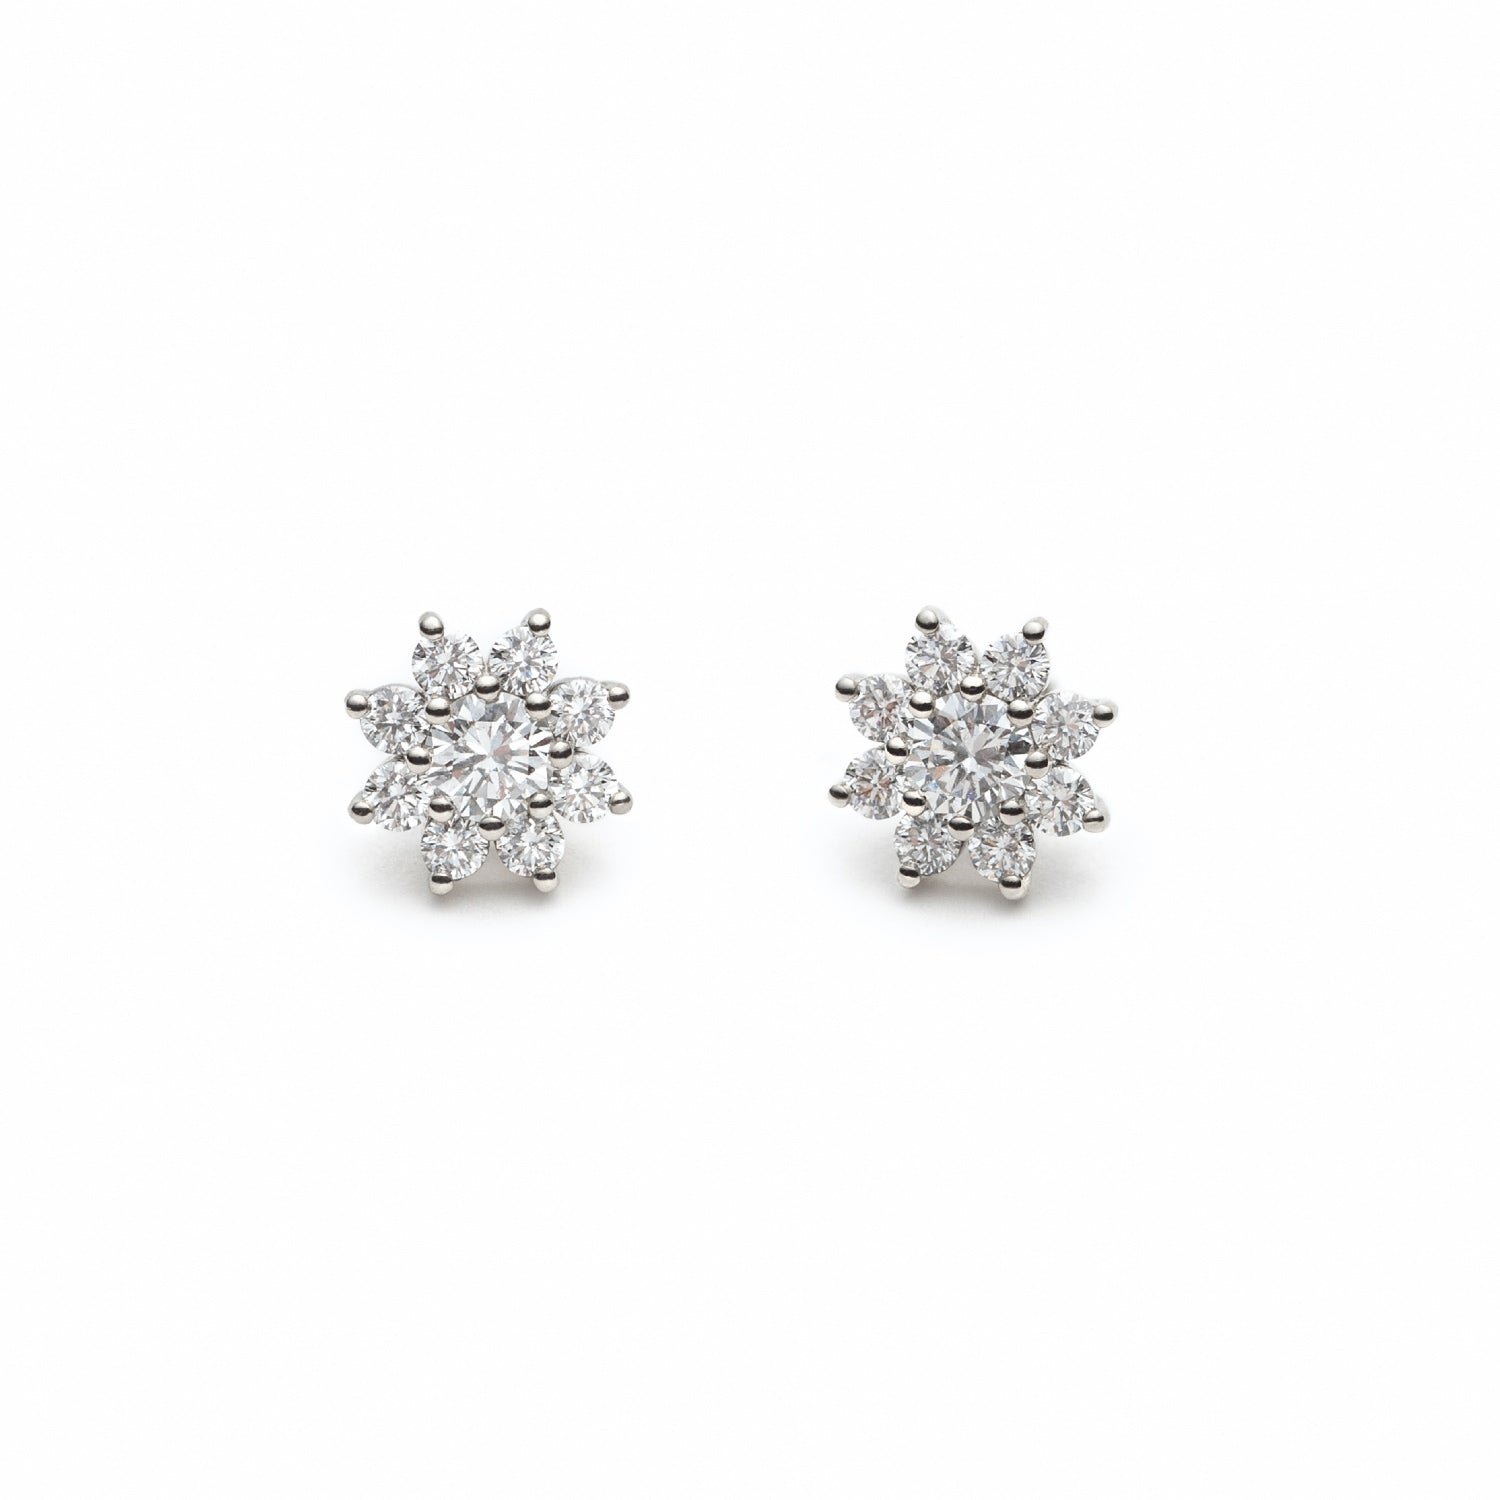 Round Brilliant Cut Diamond Floral Halo Stud Earrings in White Gold